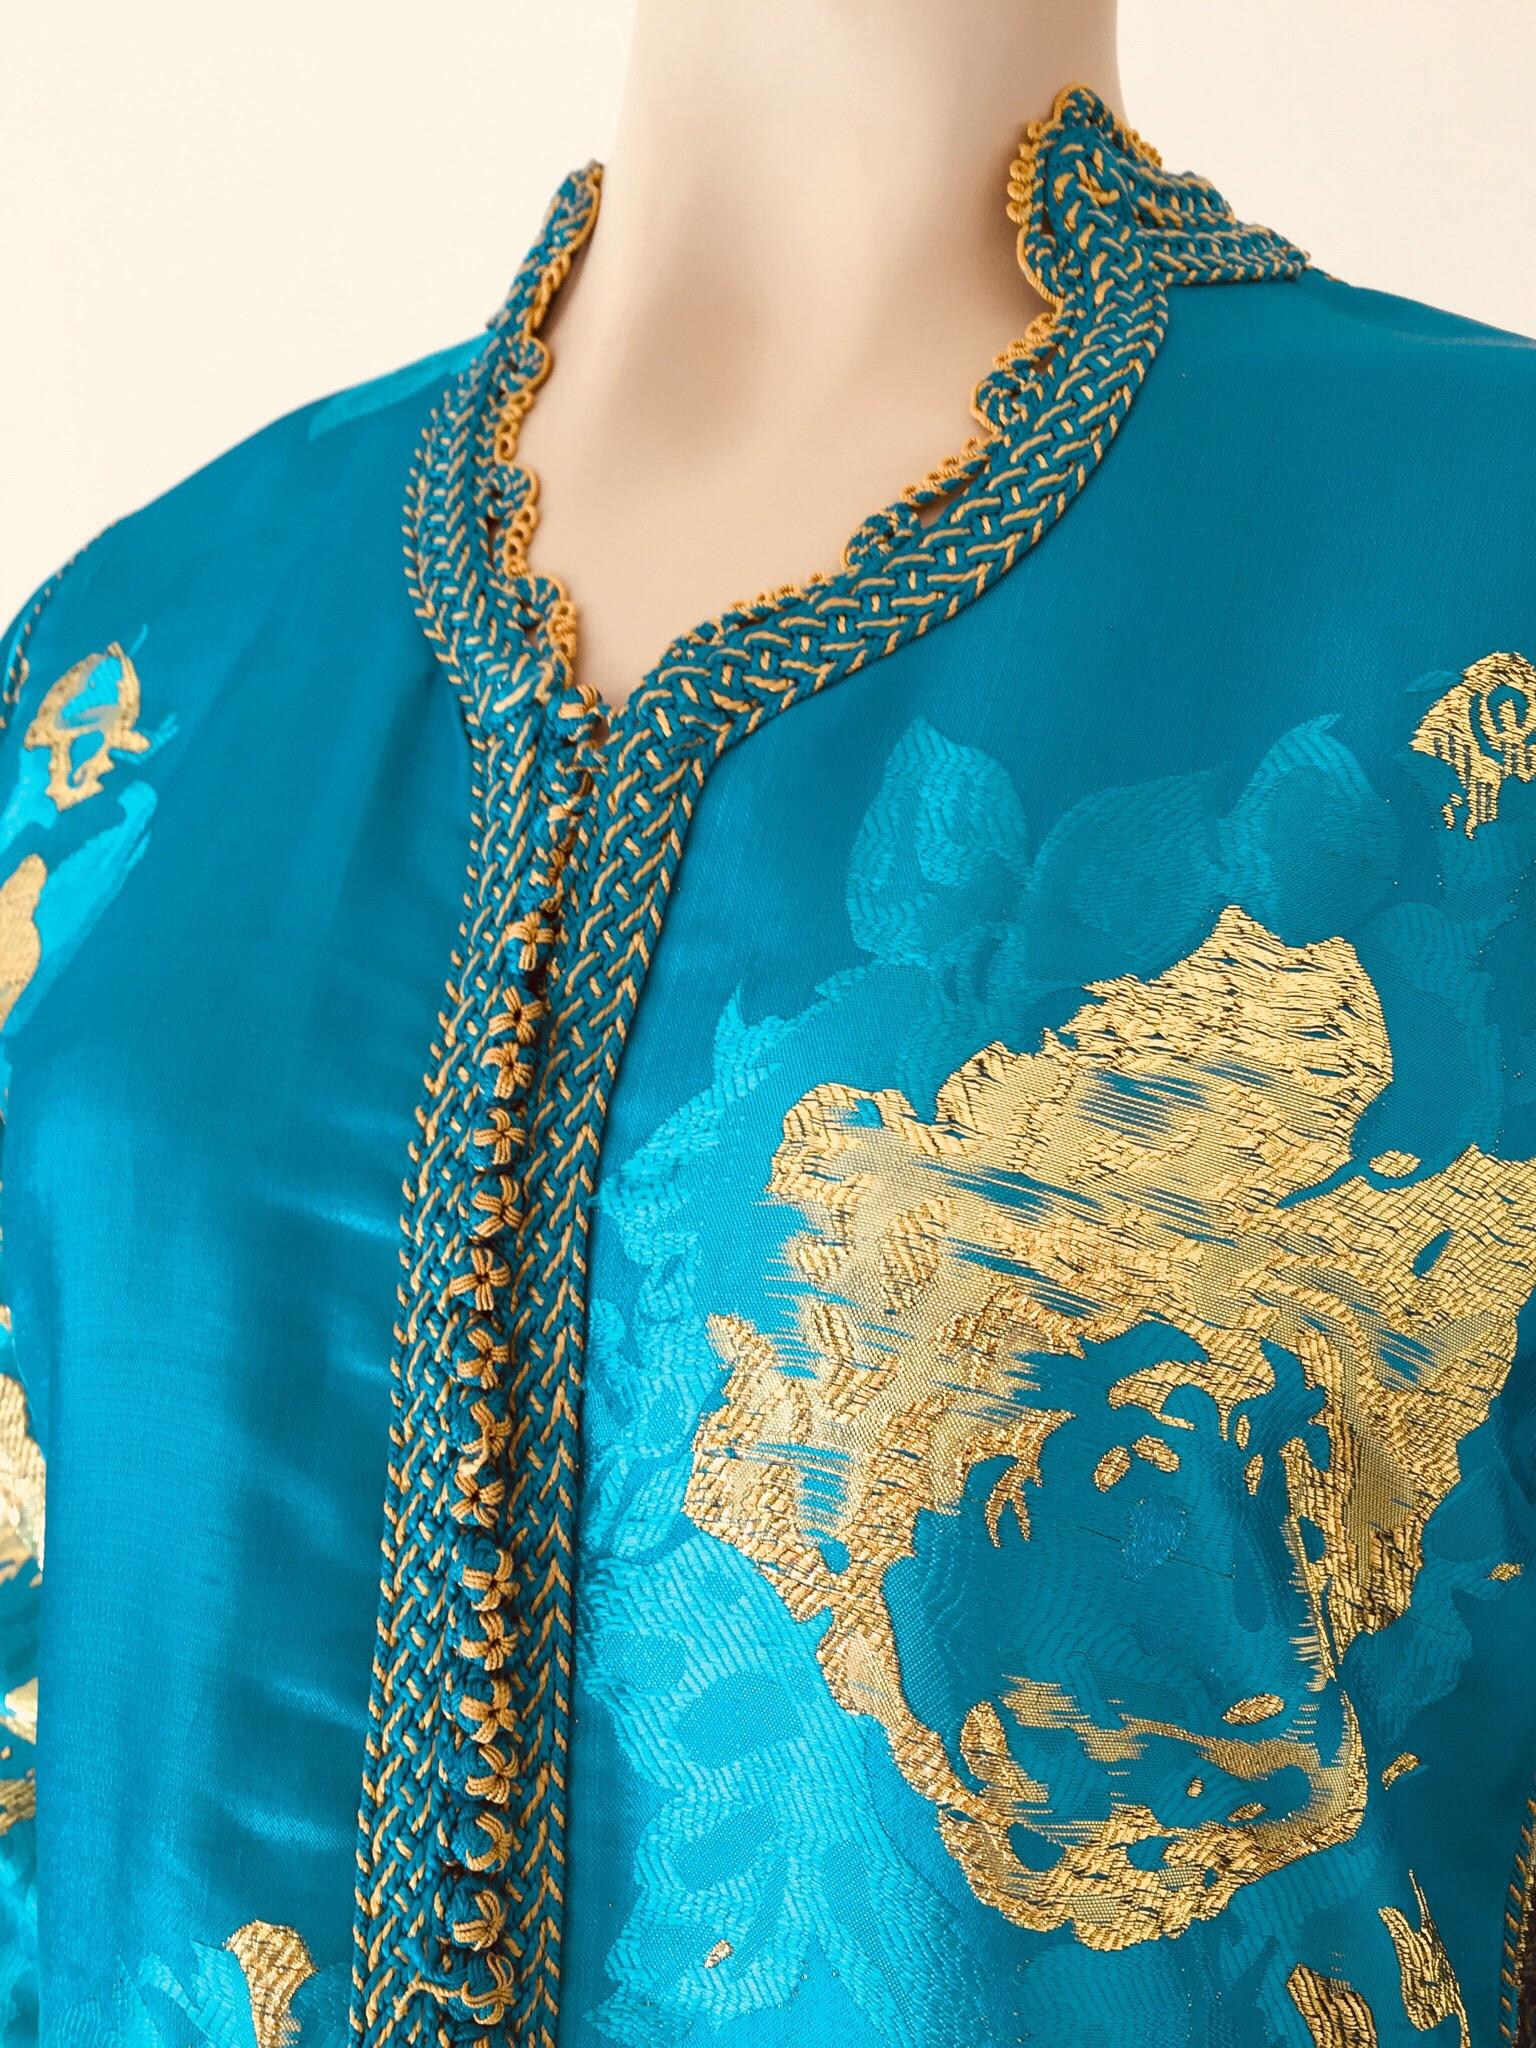 Moroccan Vintage Kaftan in Turquoise and Gold Floral Brocade Metallic Lame 3